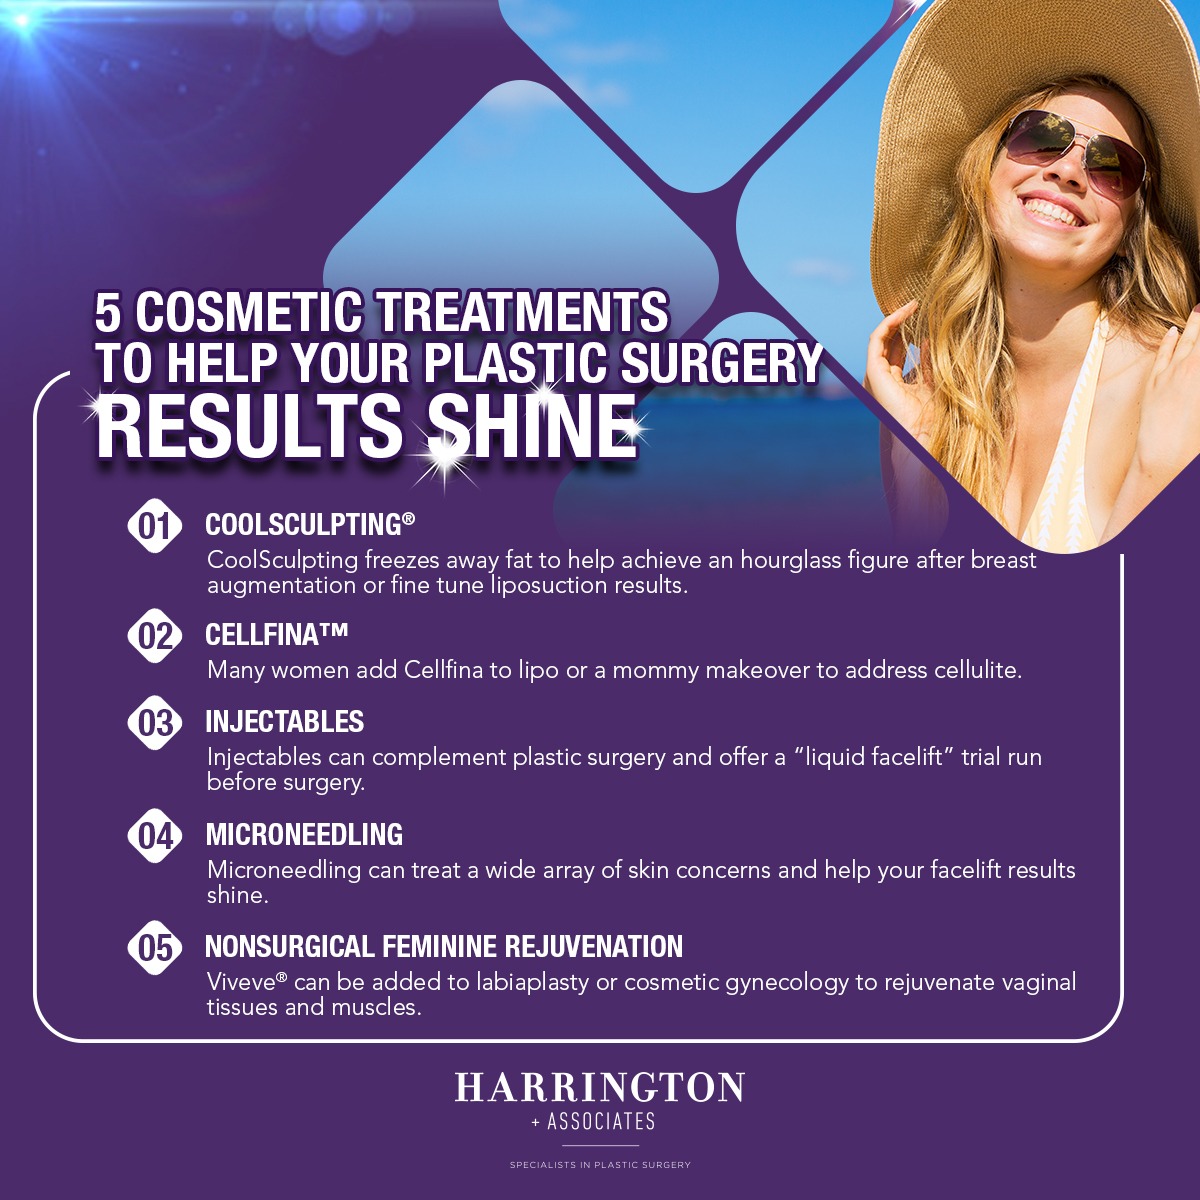 5 Cosmetic Treatments To Help Your Plastic Surgery Results Shine [Infographic]